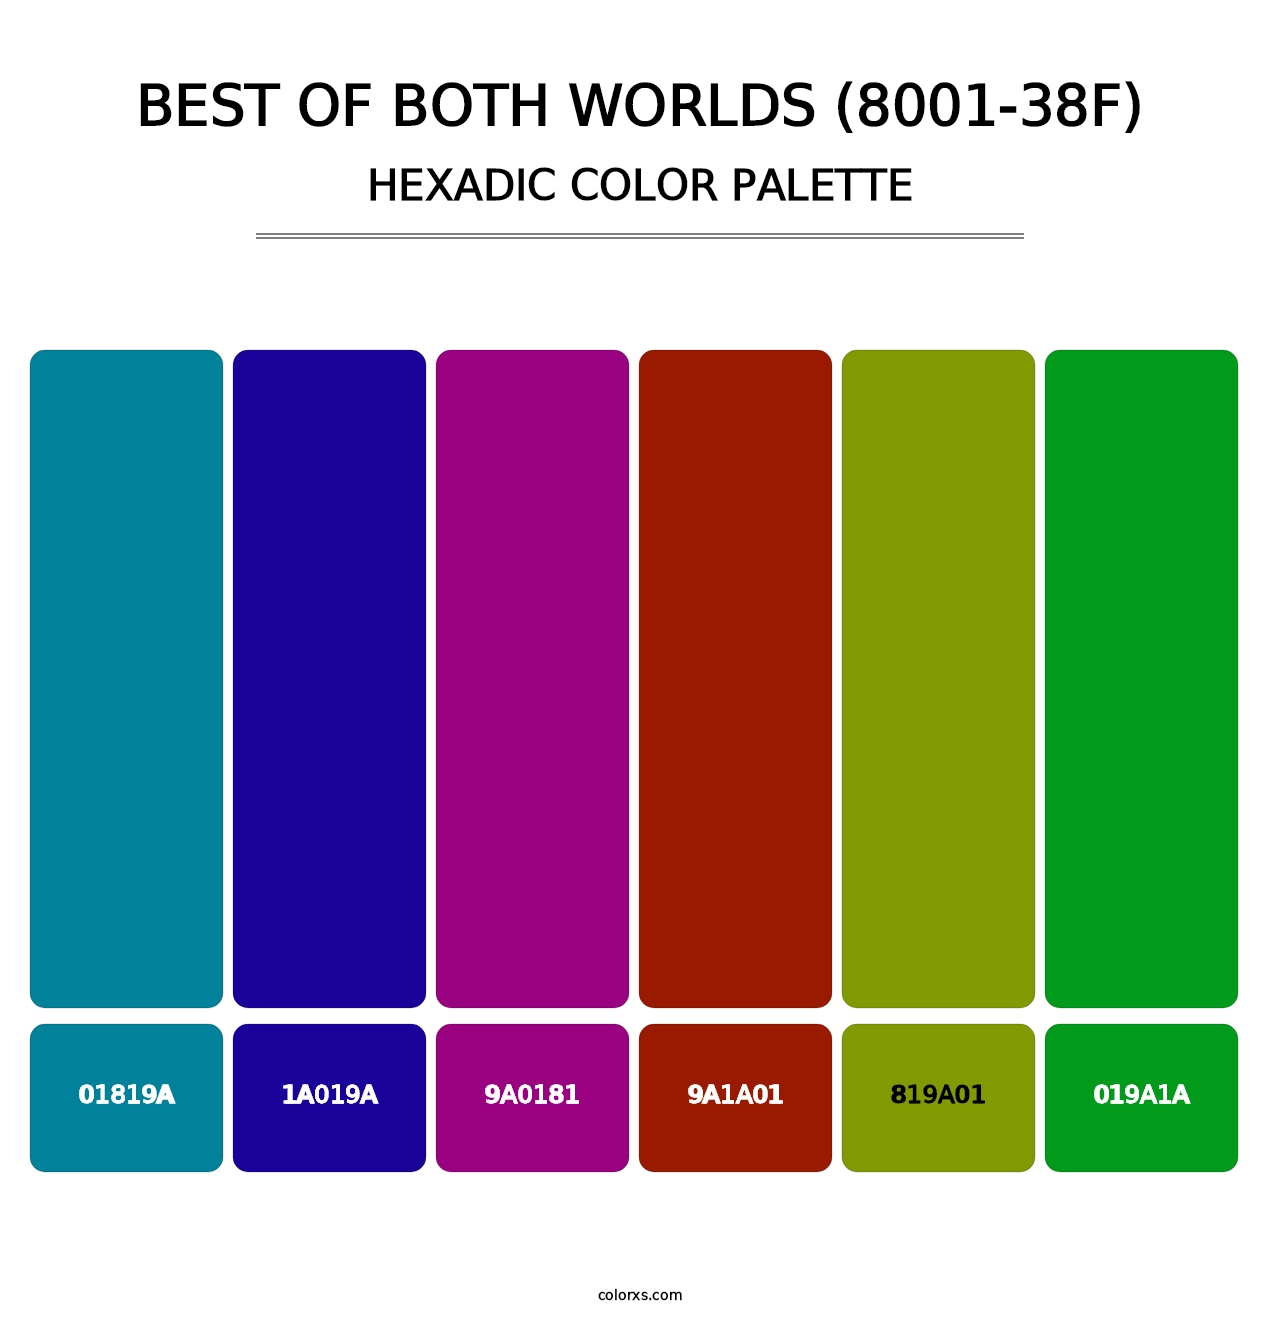 Best of Both Worlds (8001-38F) - Hexadic Color Palette